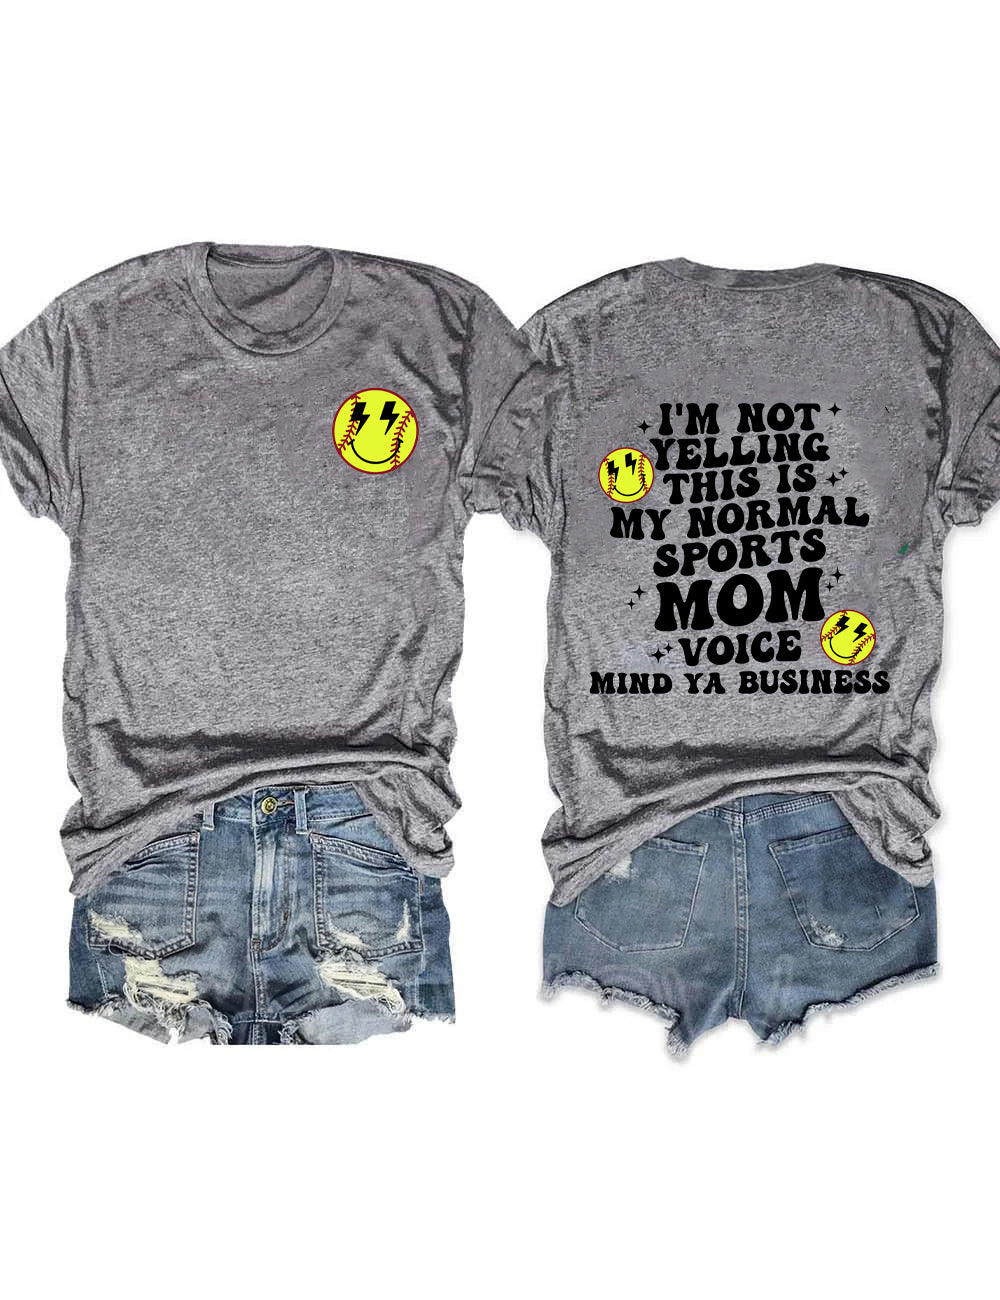 I��m Not Yelling This Is My Normal Sports Mom Voice T-Shirt